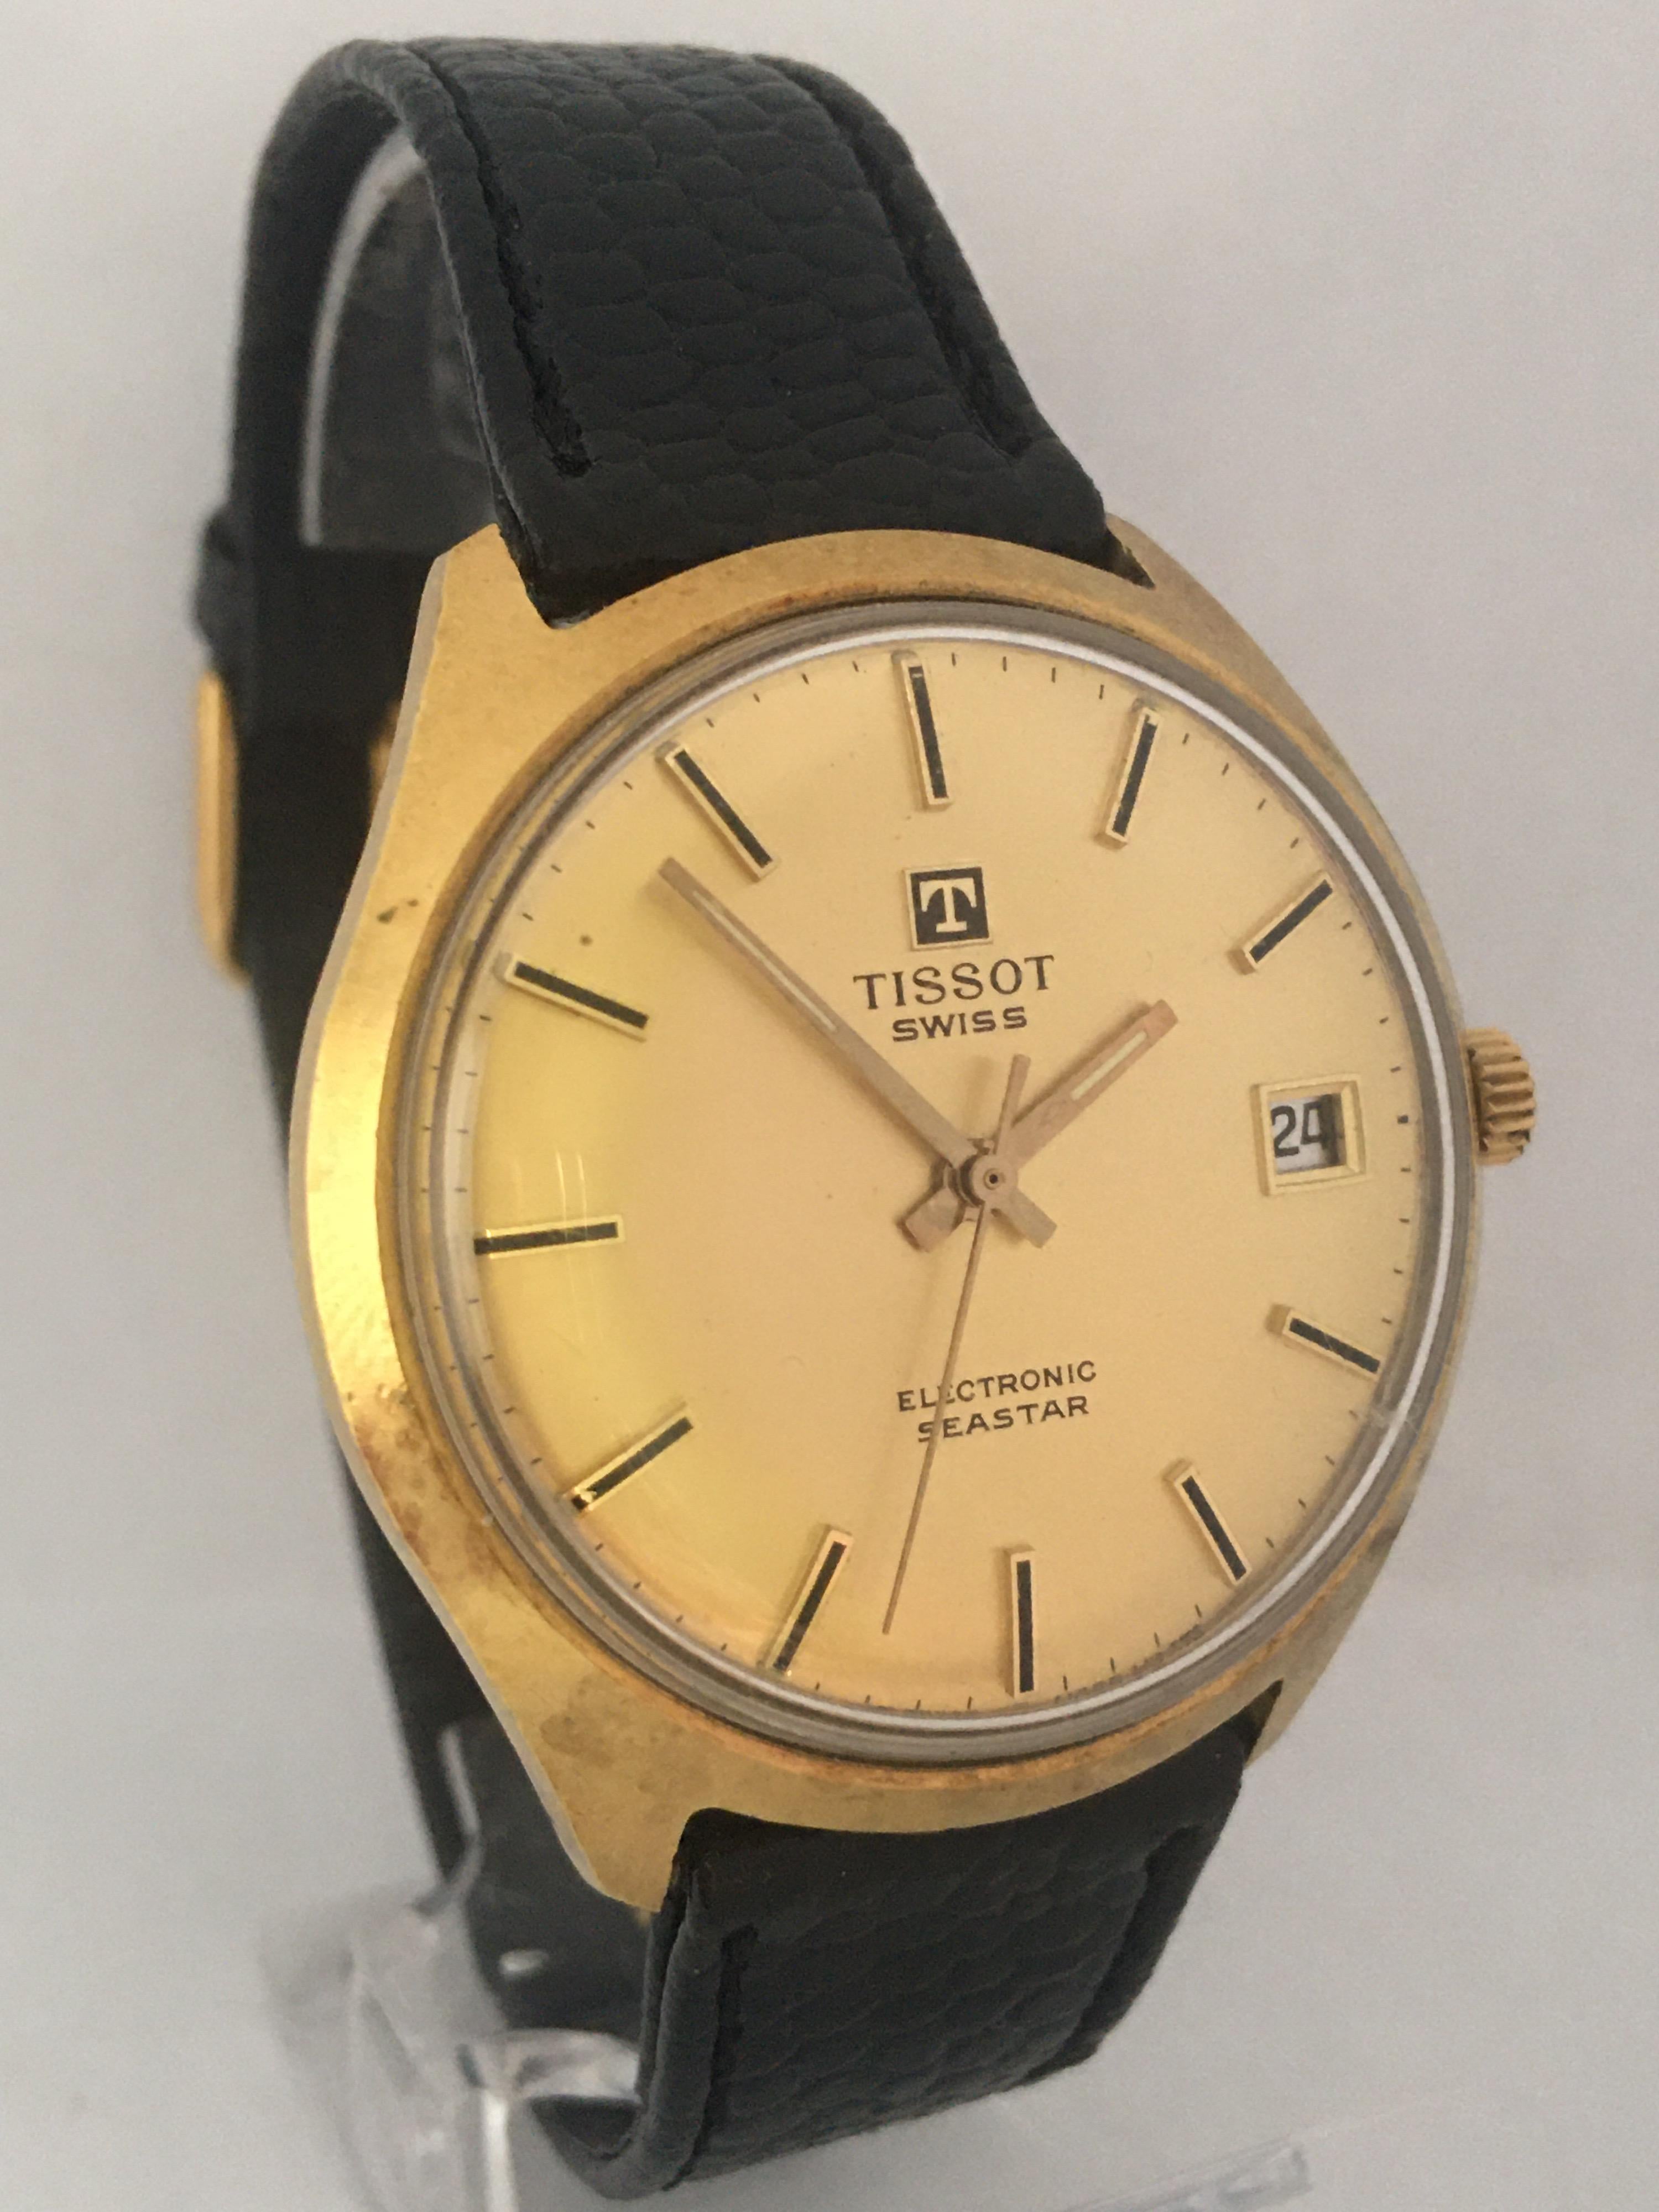 Vintage 1960s Gold-Plated TISSOT Electronic Seastar Watch For Sale 2